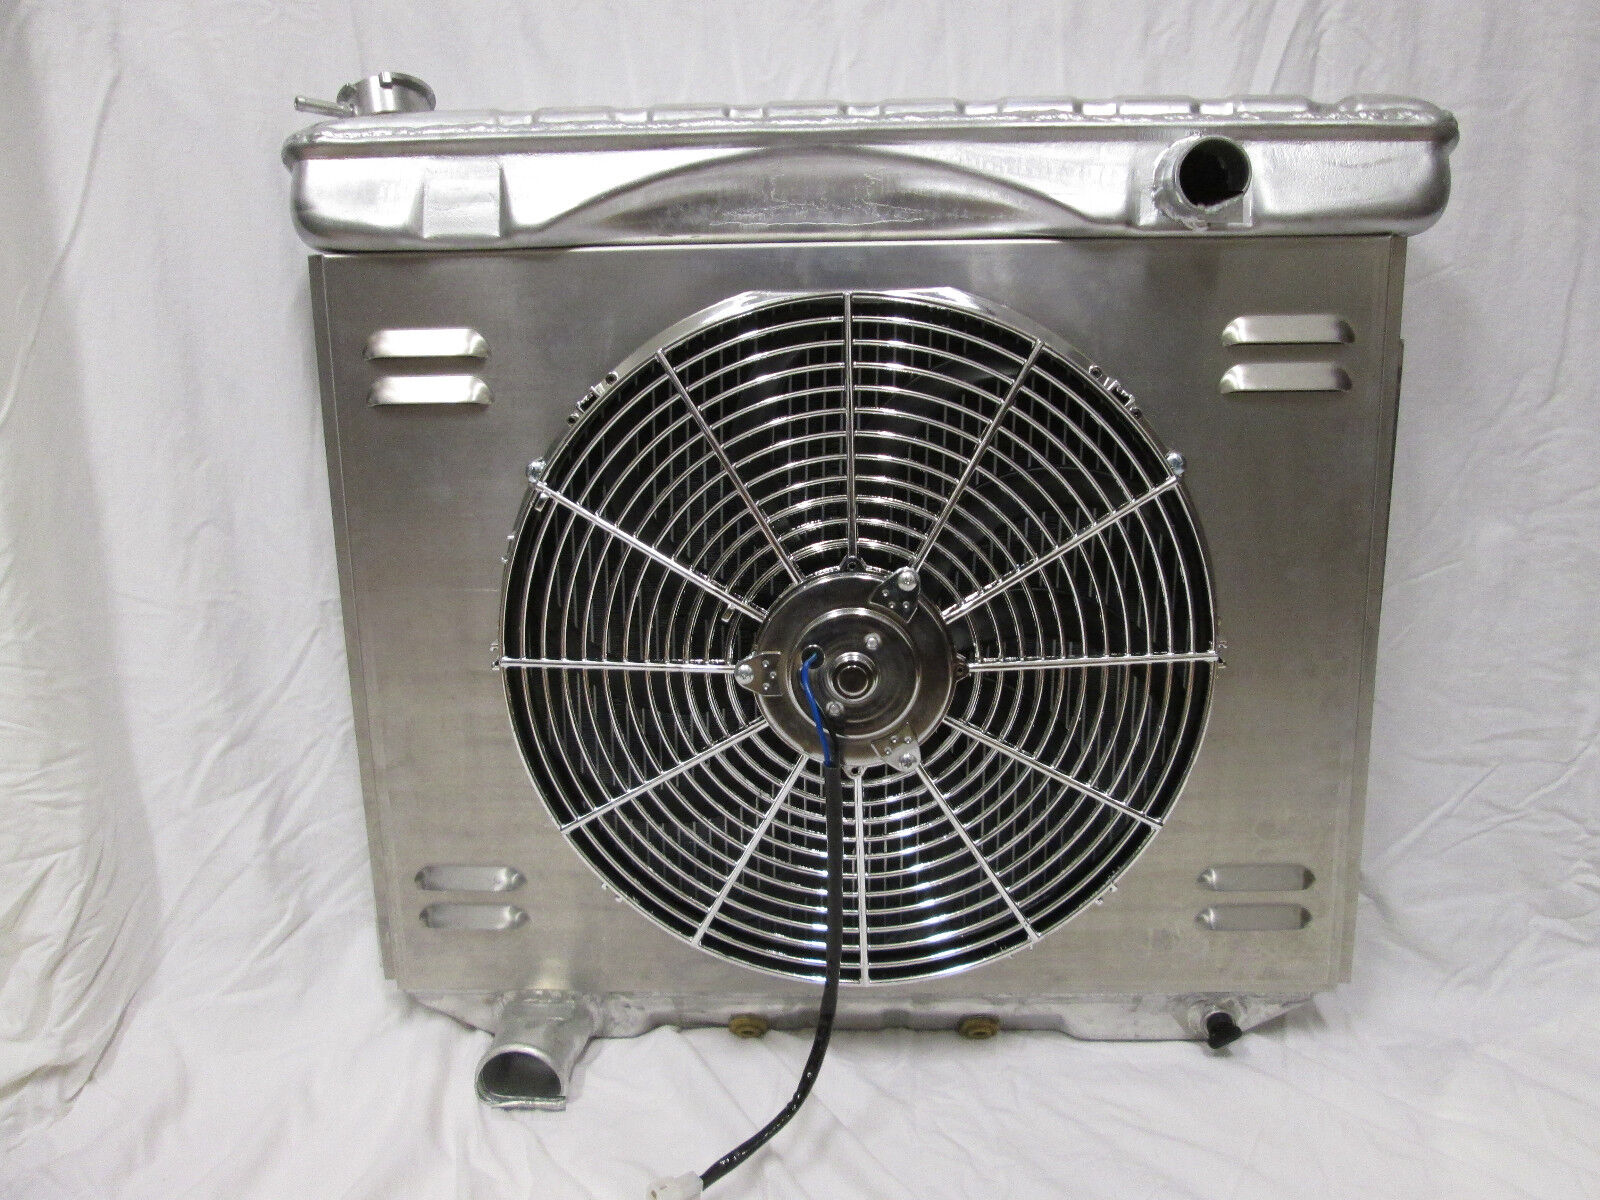 Ford Aluminum Radiator Full Size 1957 to 1959 and Mercury with Fan and Shroud